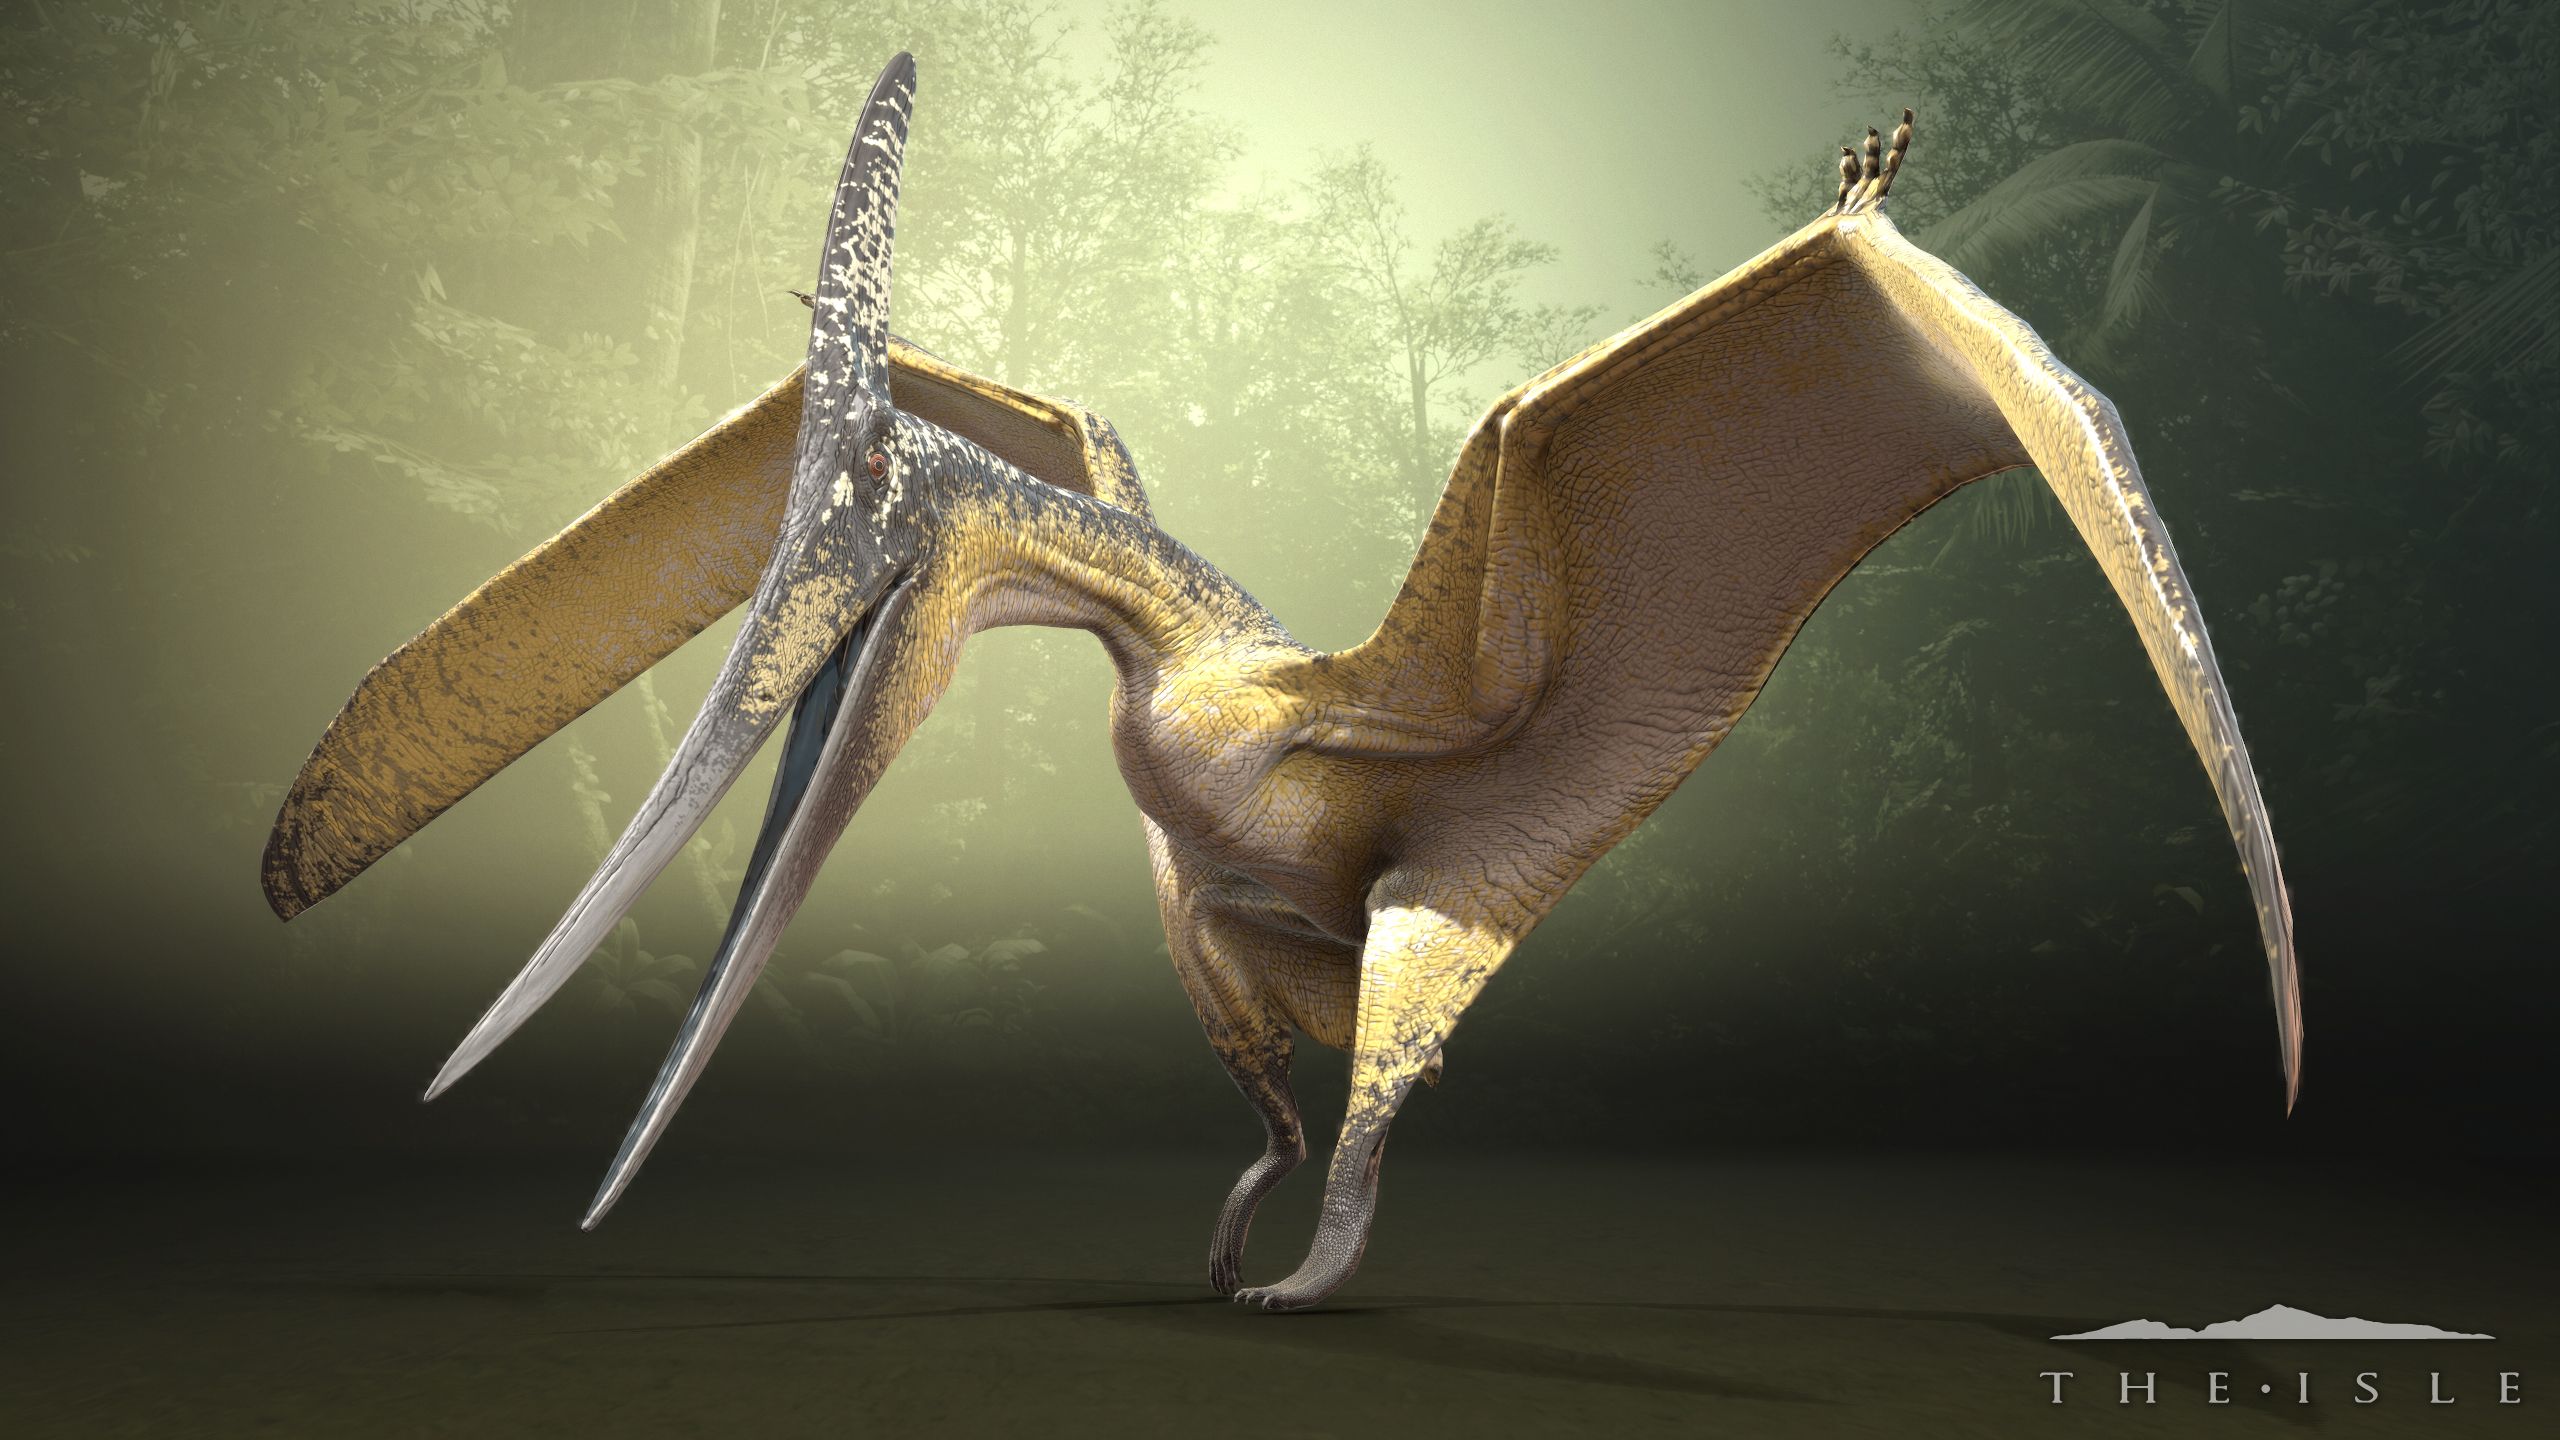 Pterodactyl, Pteranodon & Other Flying 'Dinosaurs